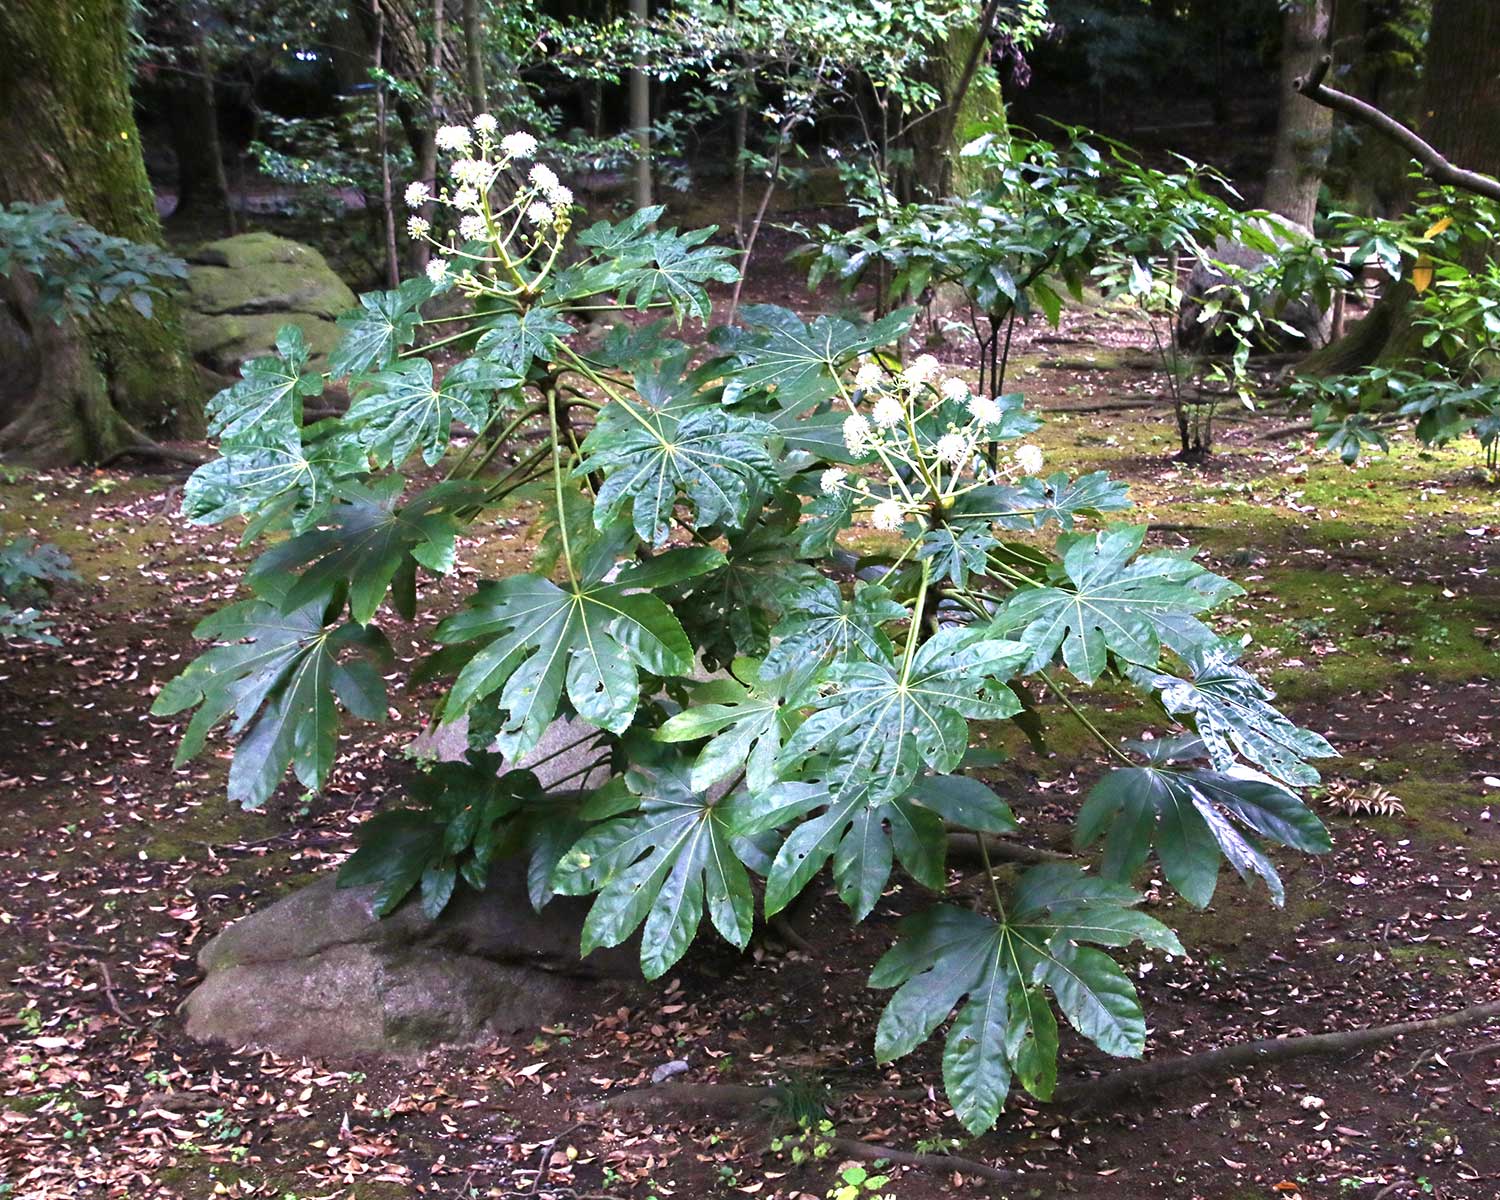 Fatsia japonica in its natural woodland environment